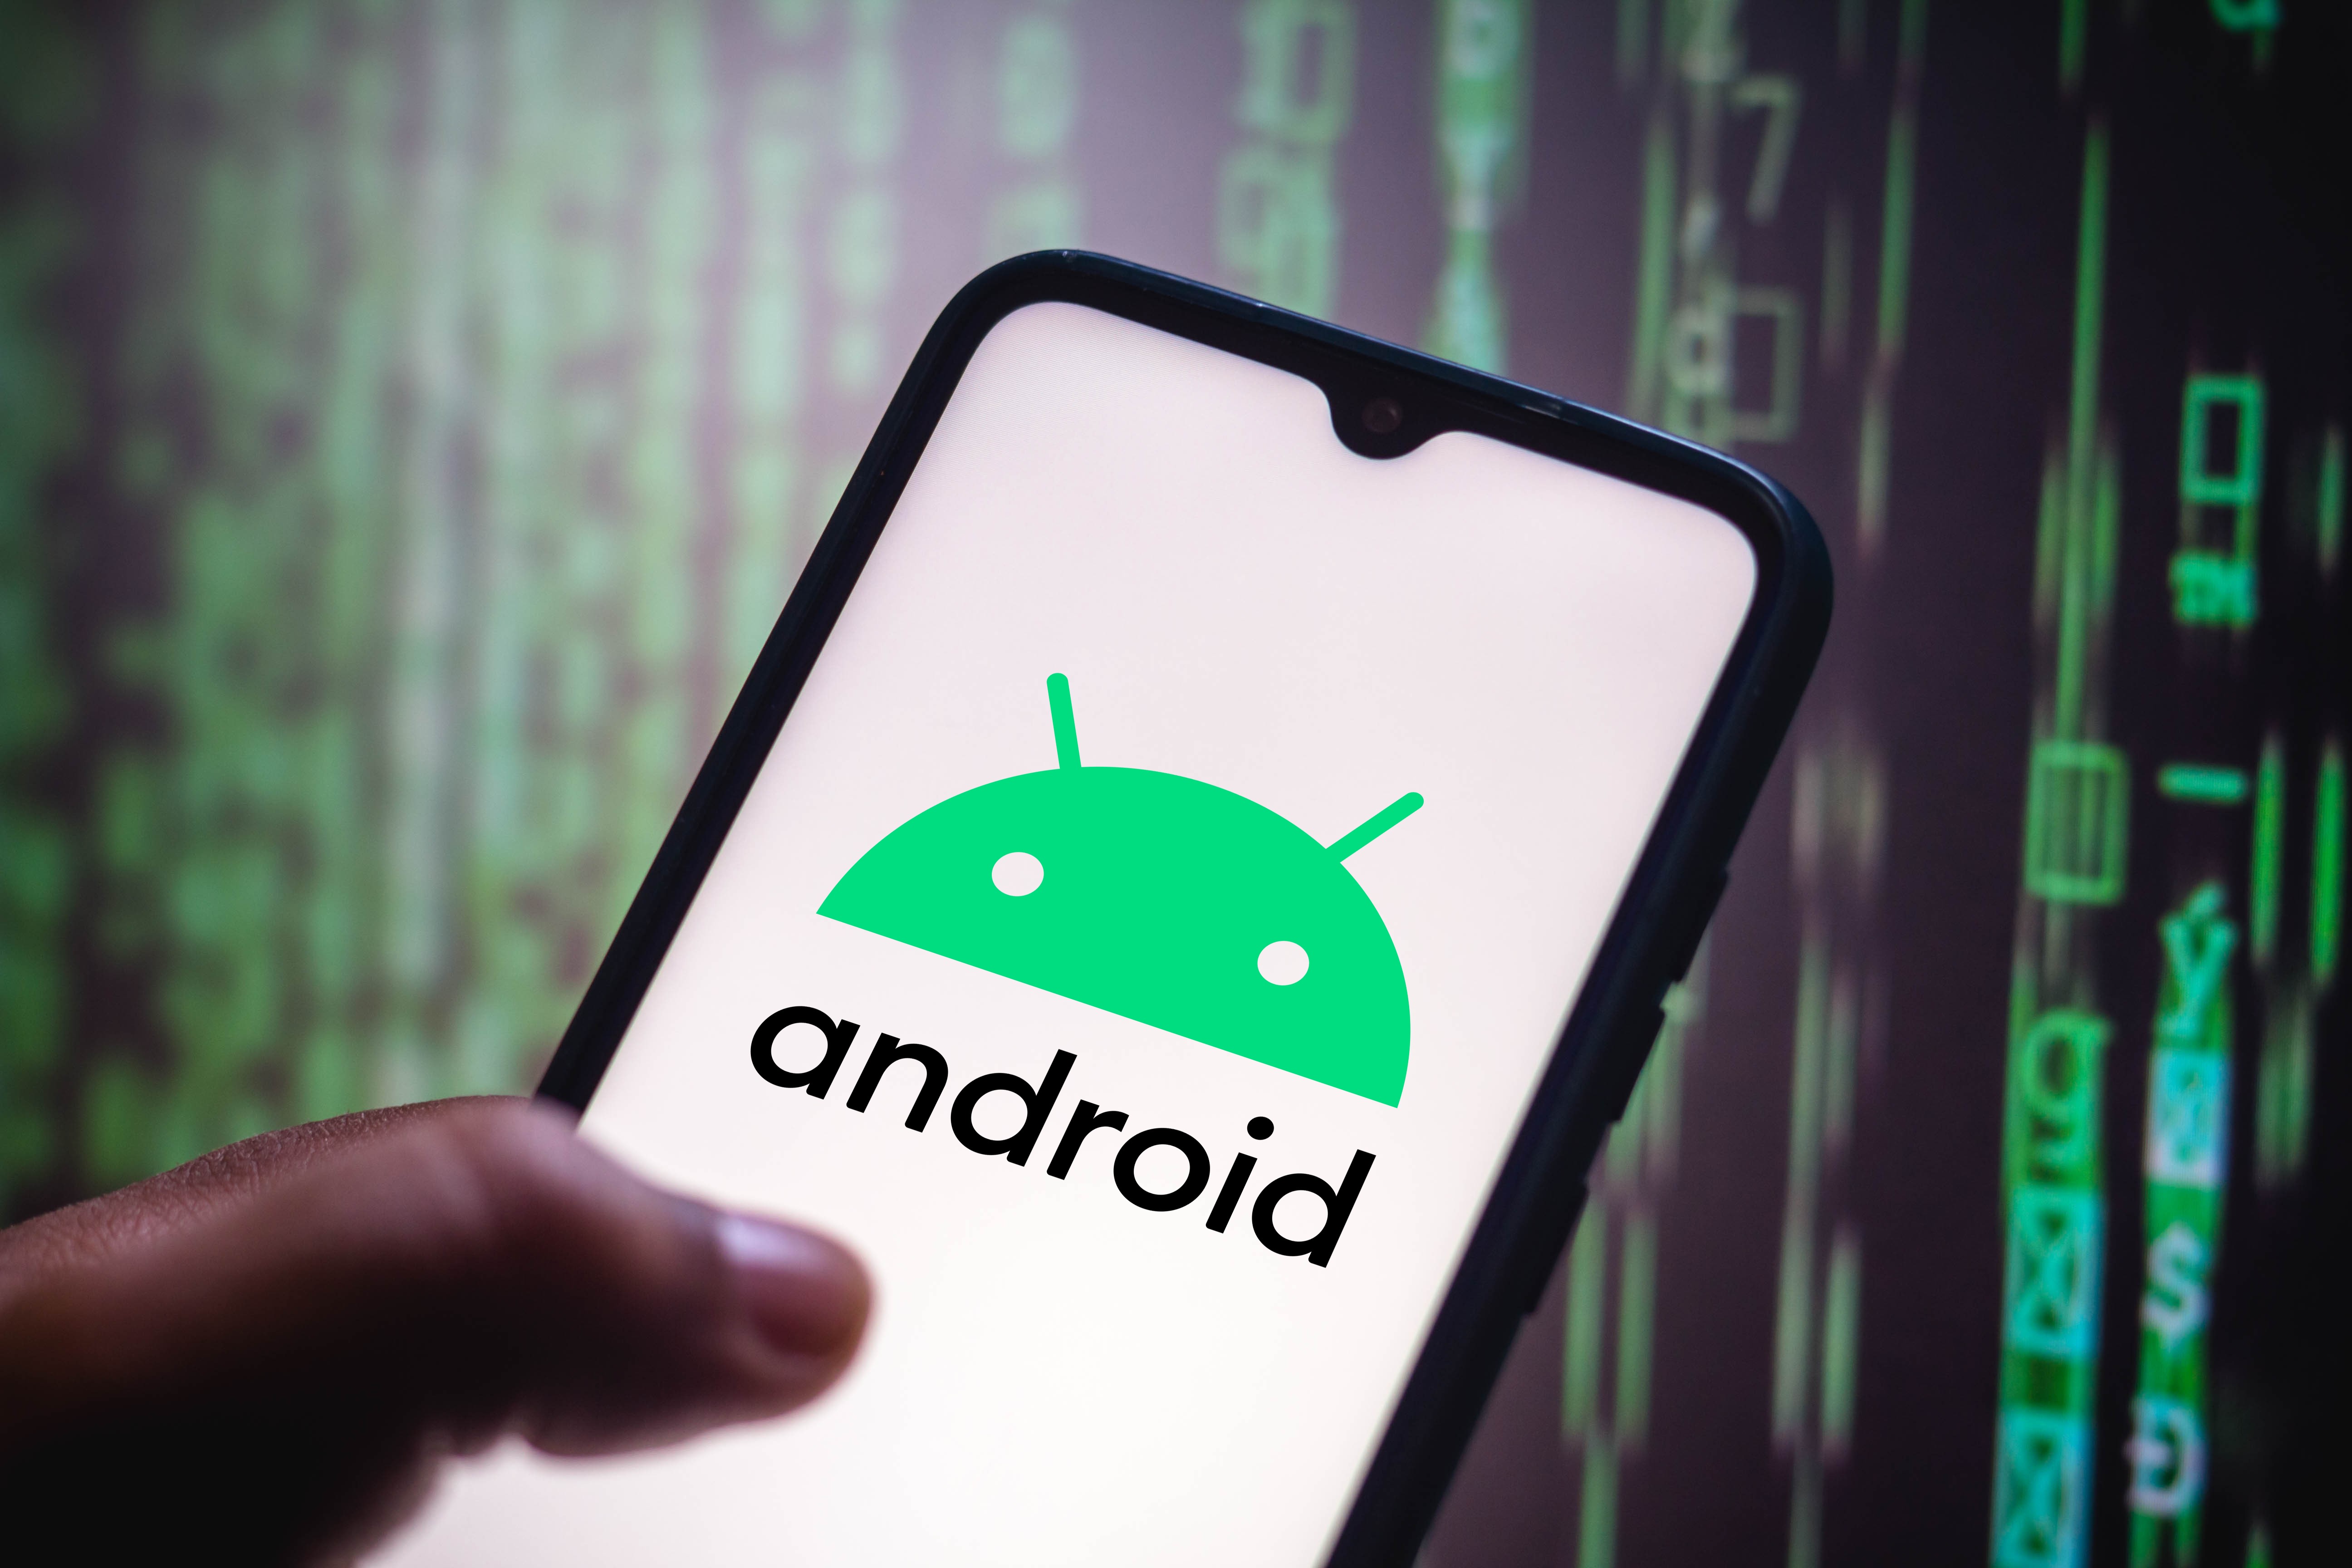 Android 15 will allow dark mode to be imposed on all applications